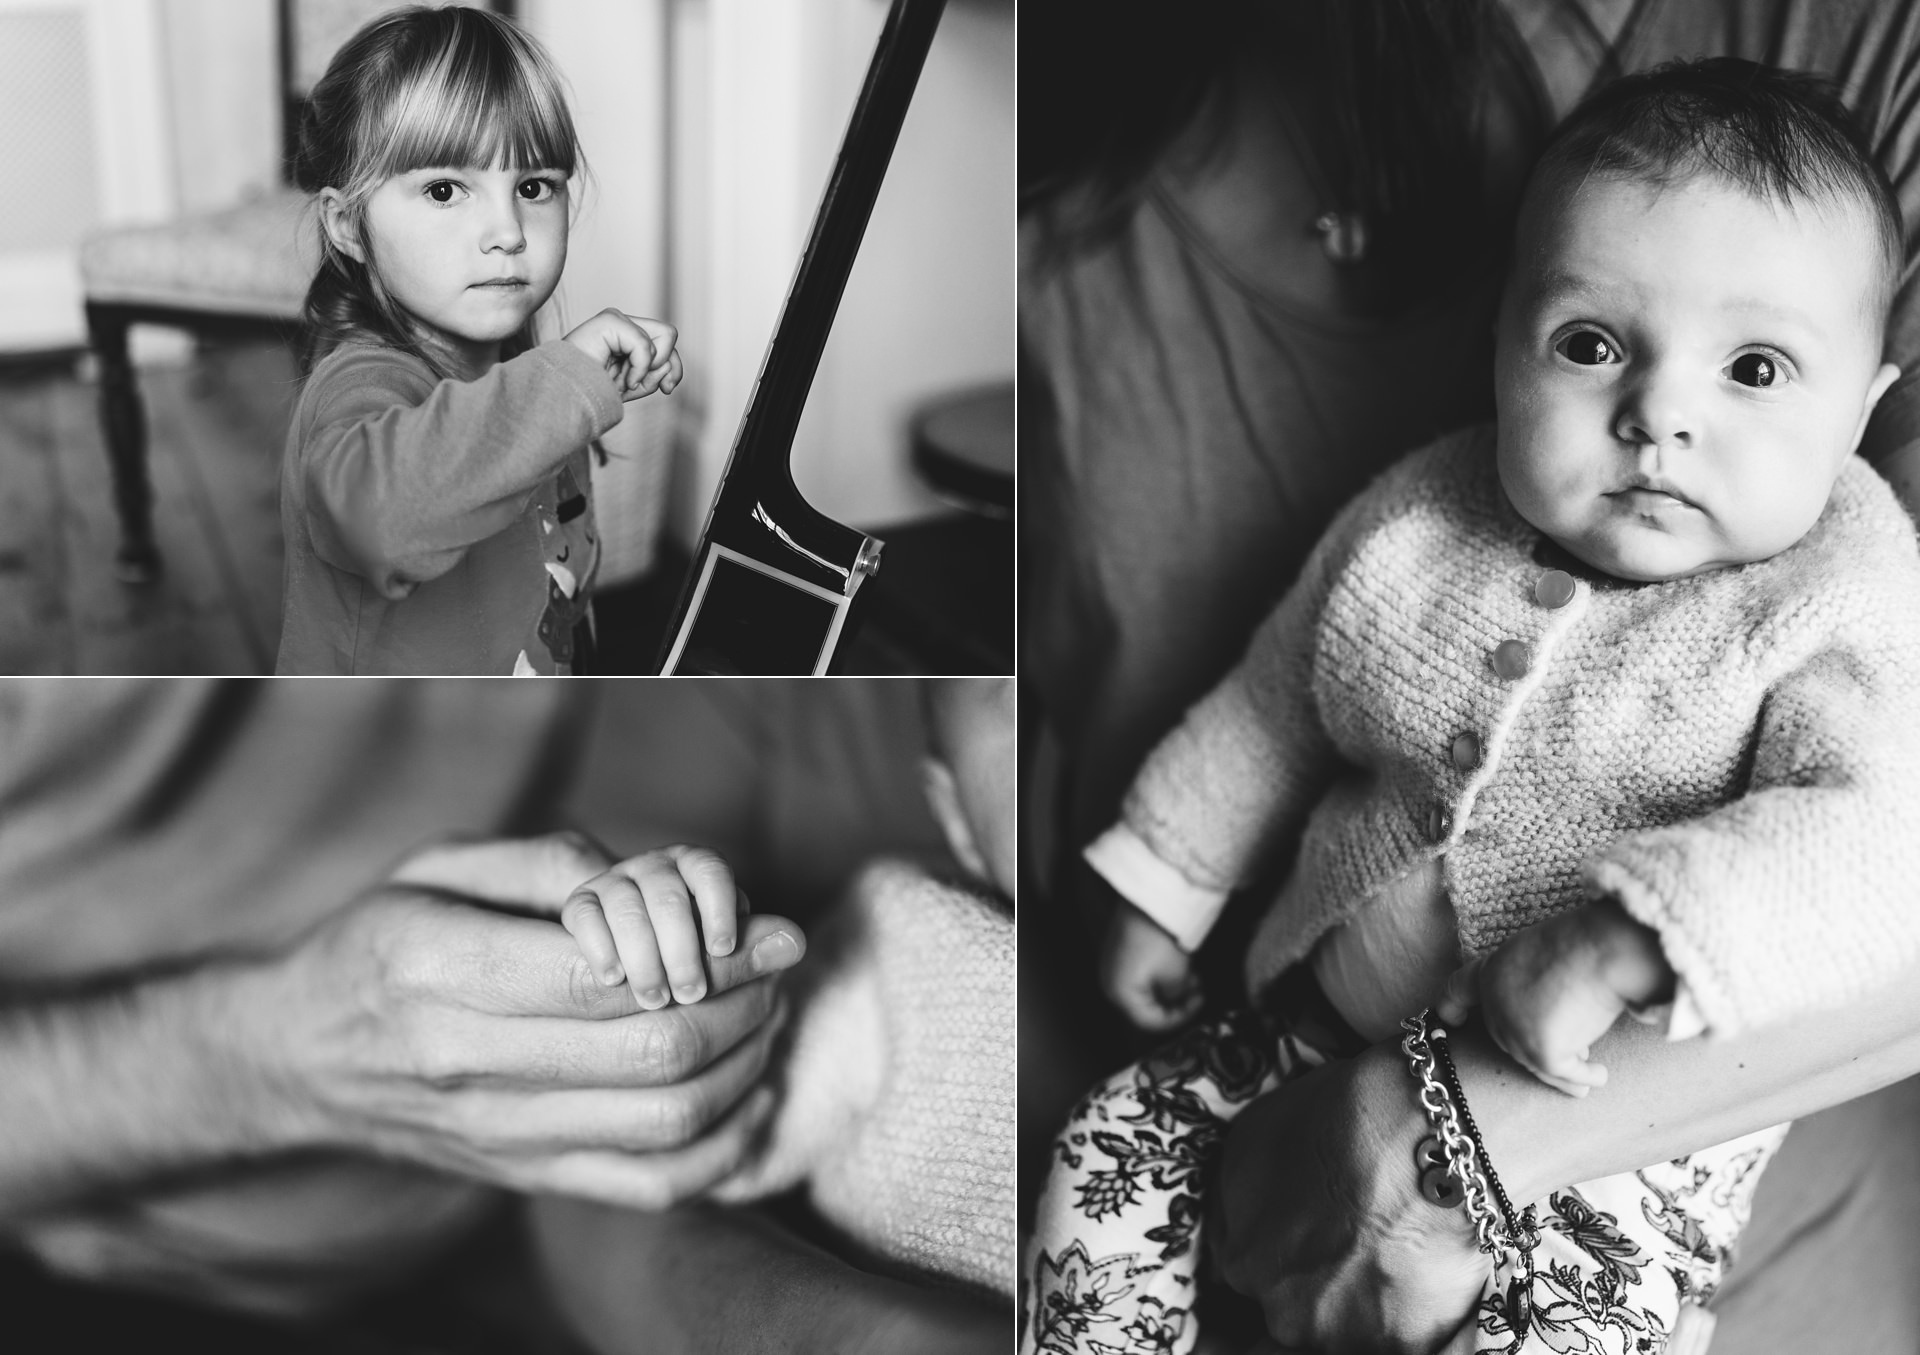 Black and white images of two young children